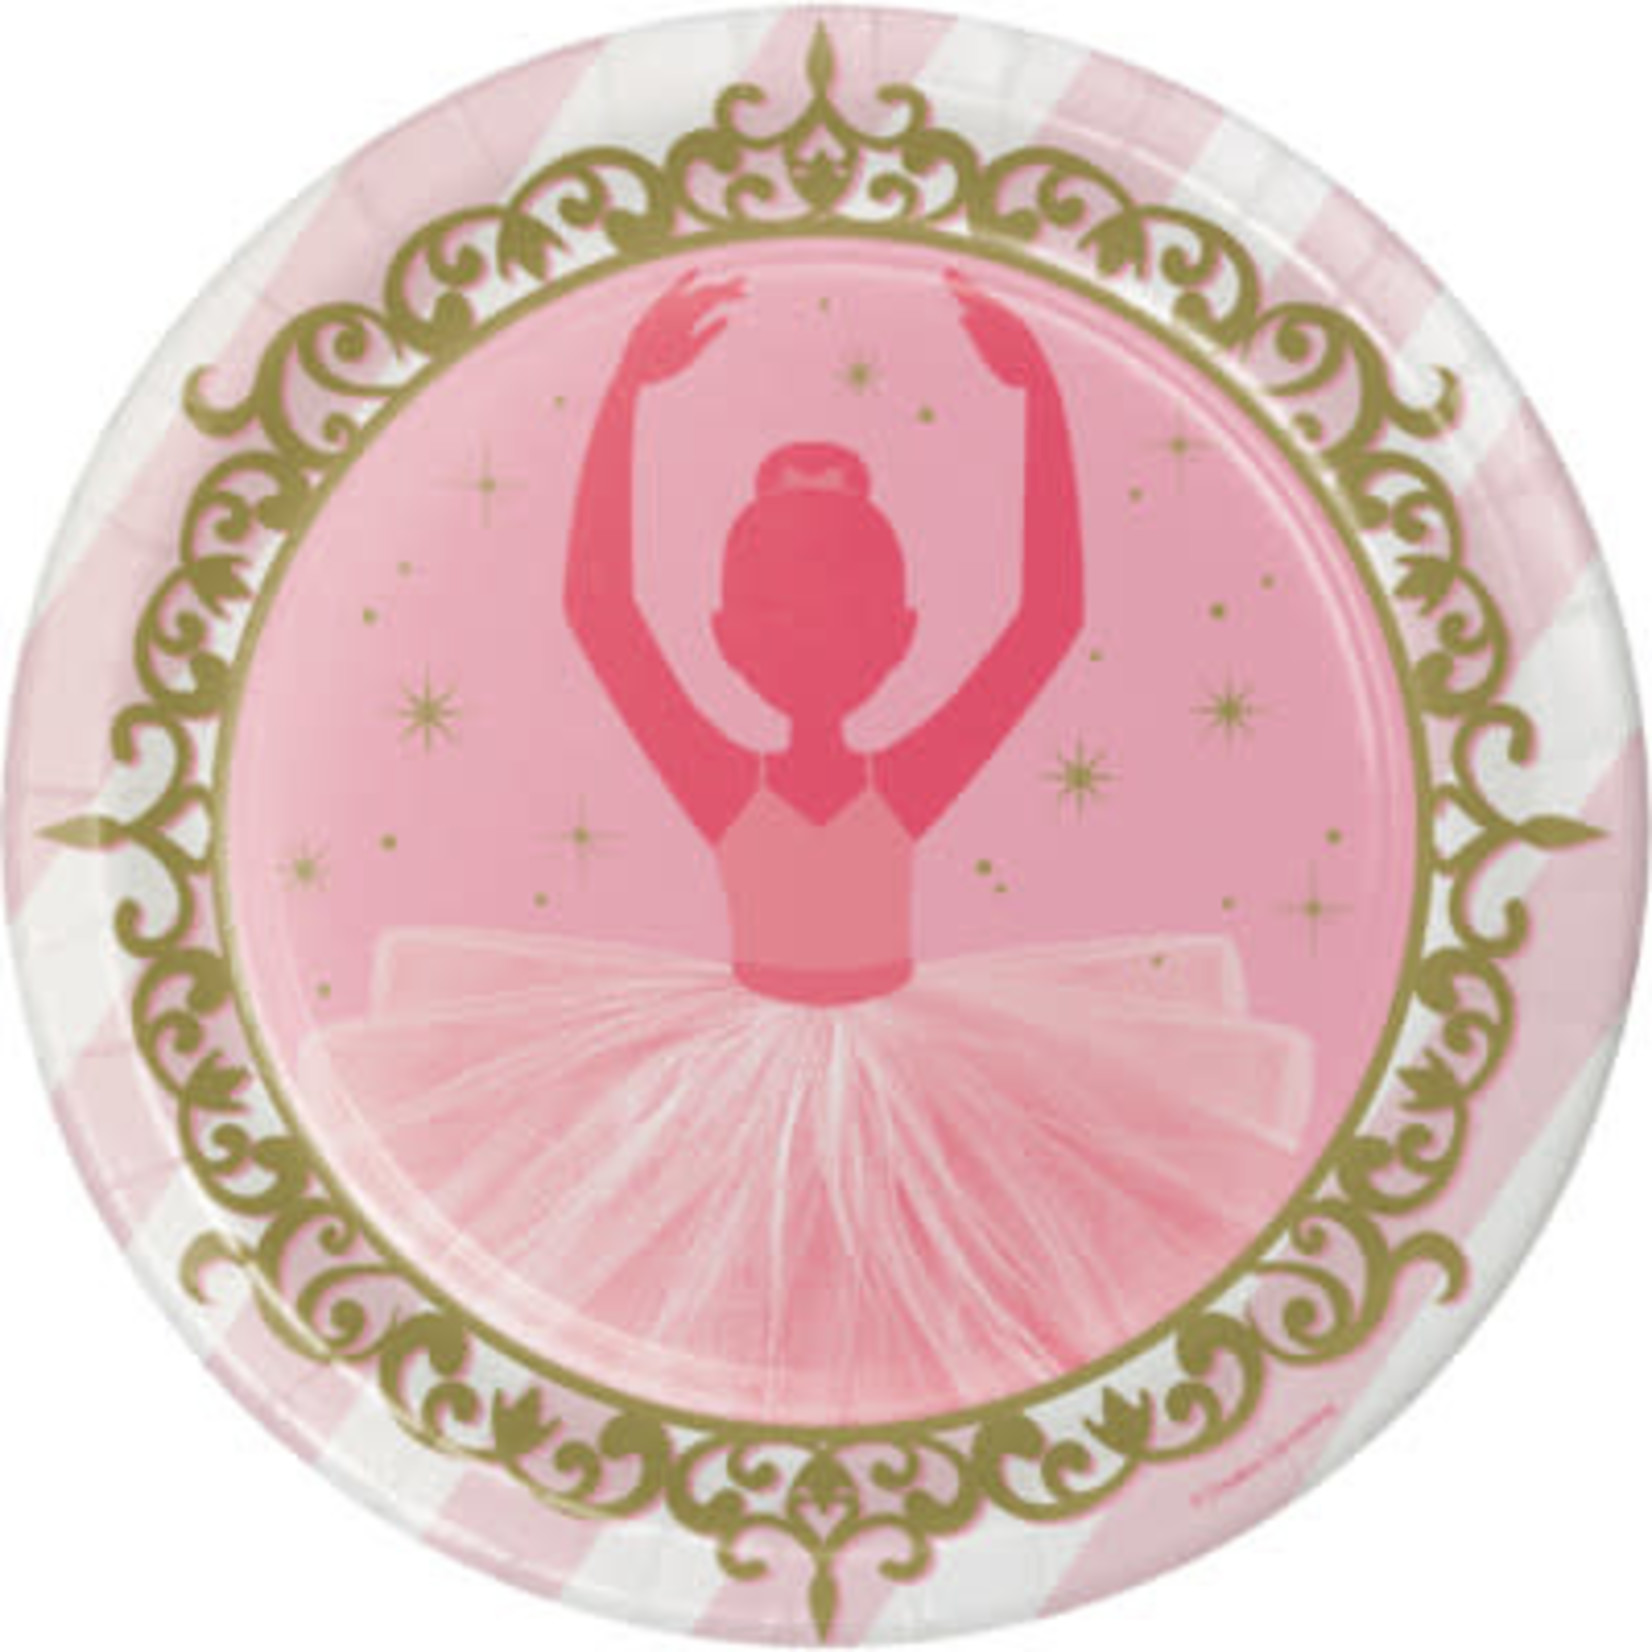 Creative Converting Twinkle Toes 9" Plates - 8ct.